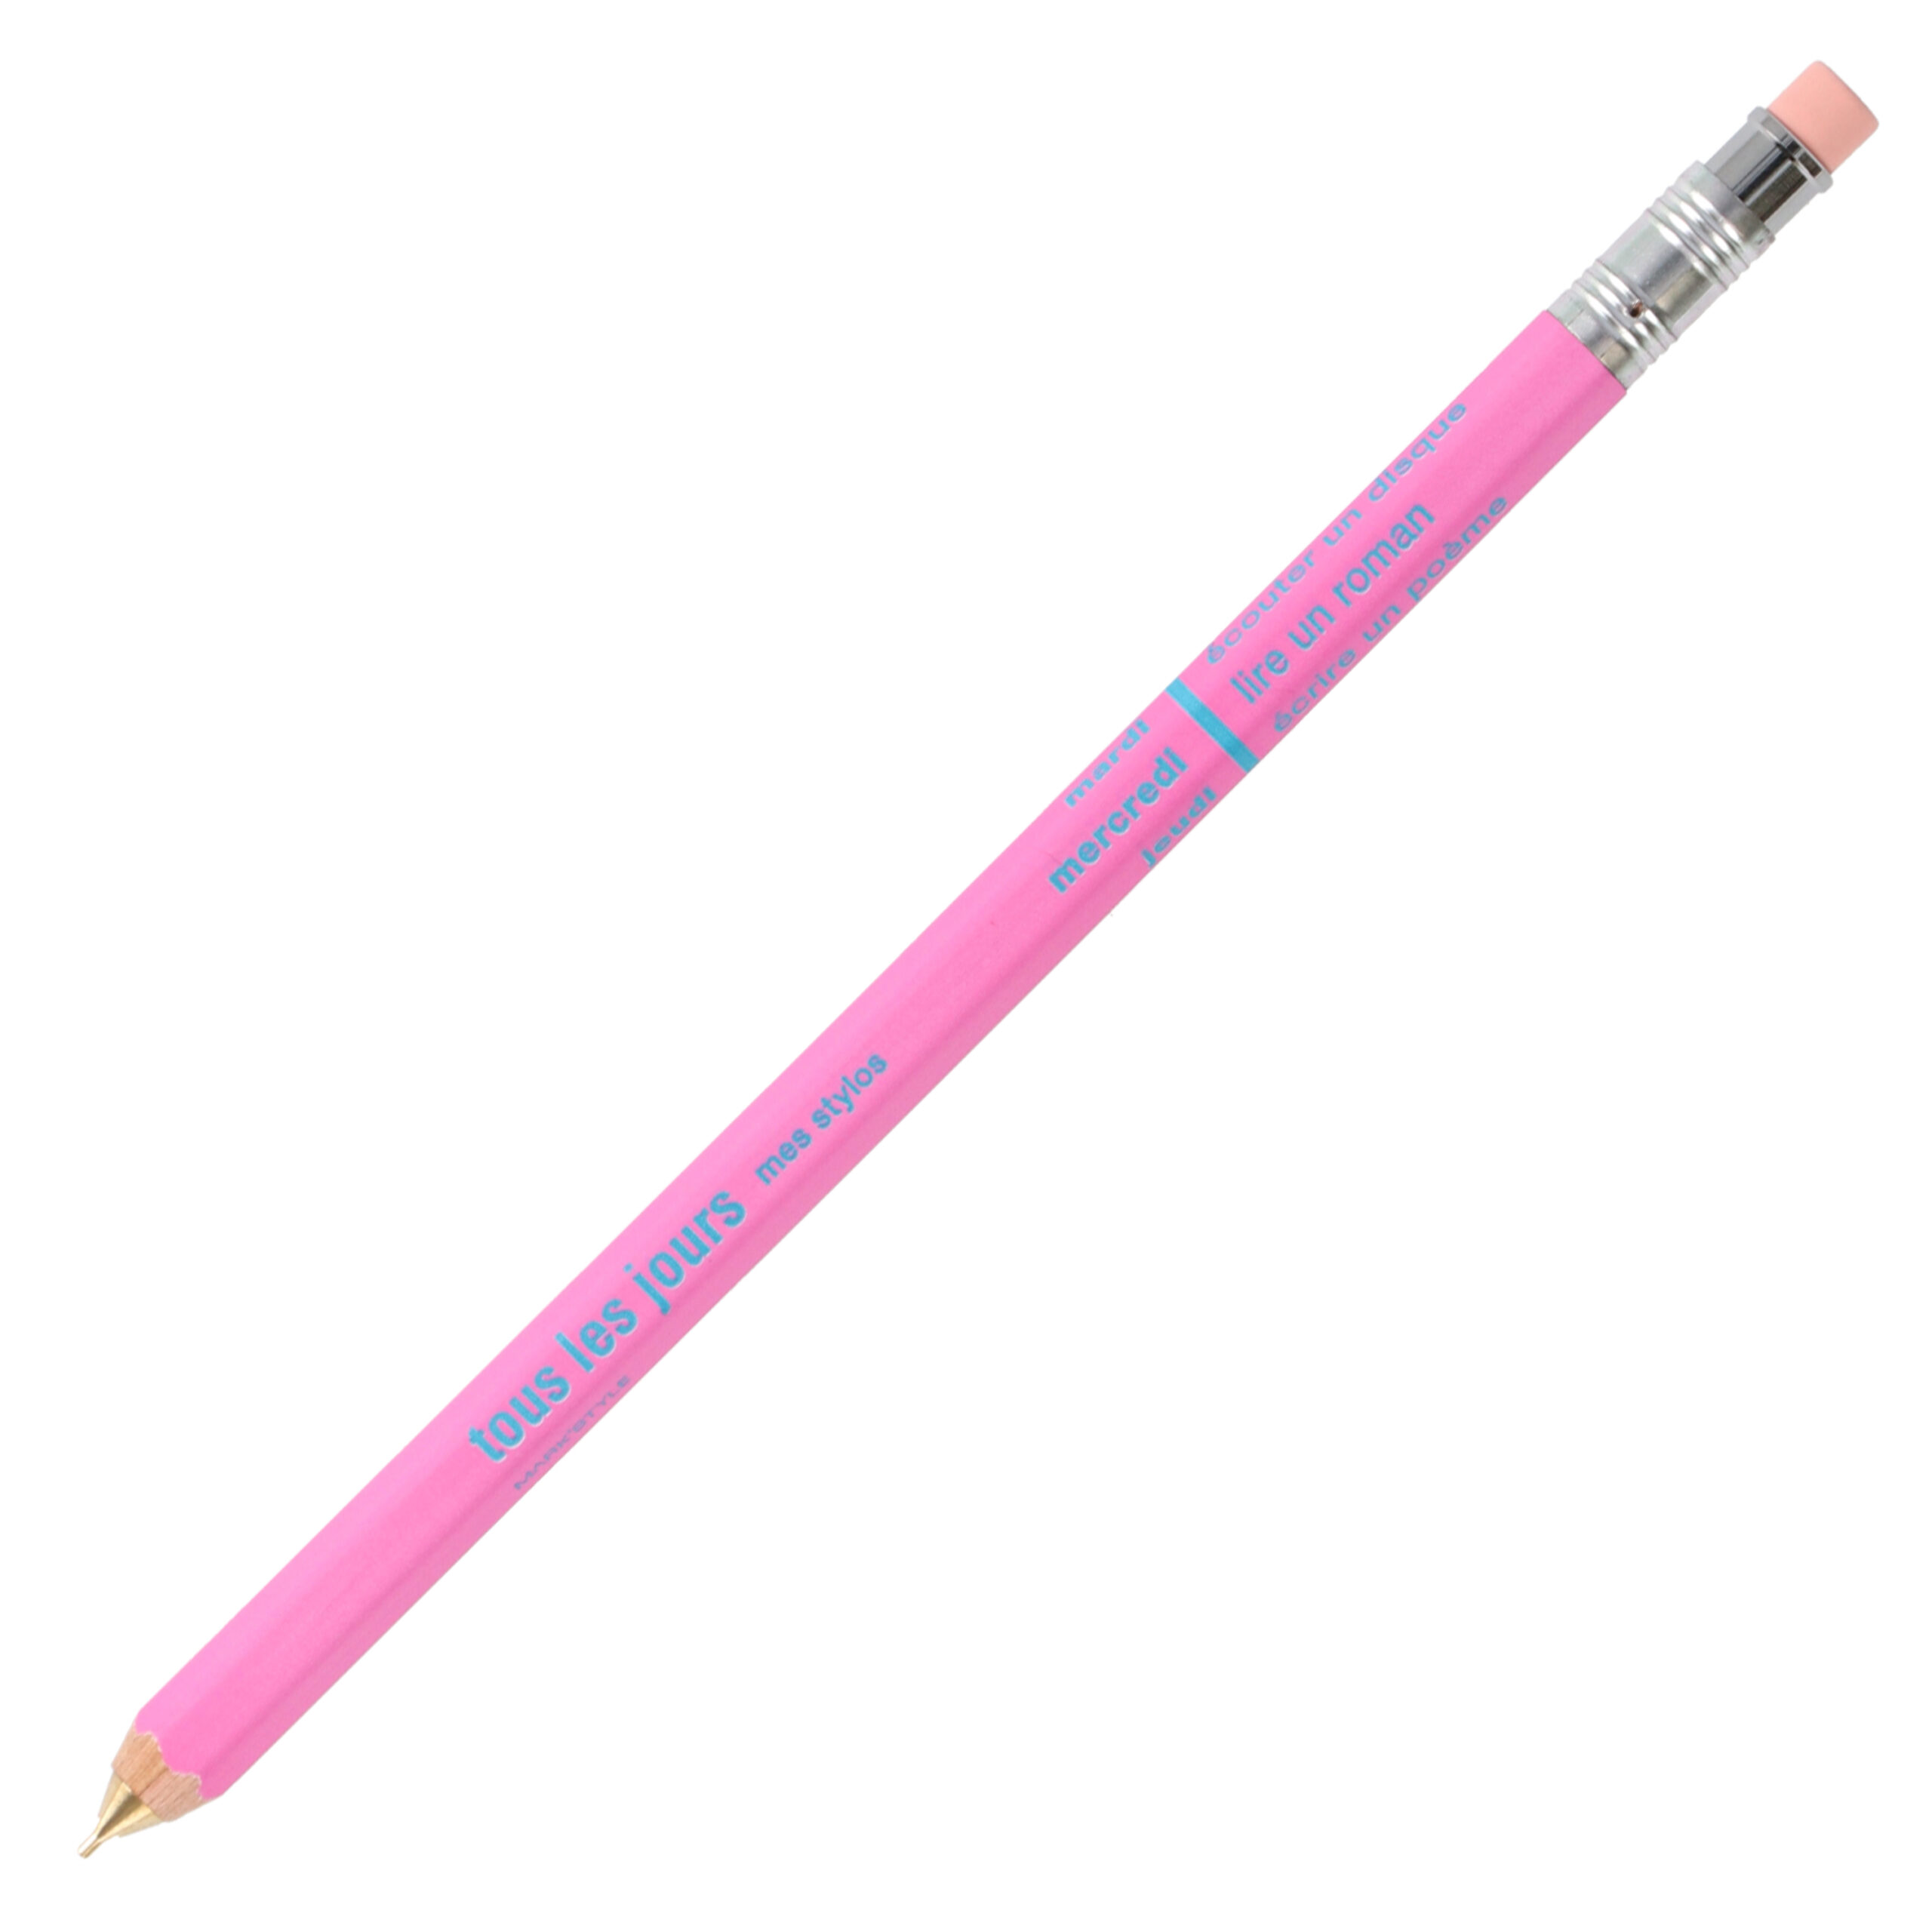 DAY-SH3-VPK - Vivid Pink - Mechanical Pencil with Eraser - MARK'STYLE - tous les jours